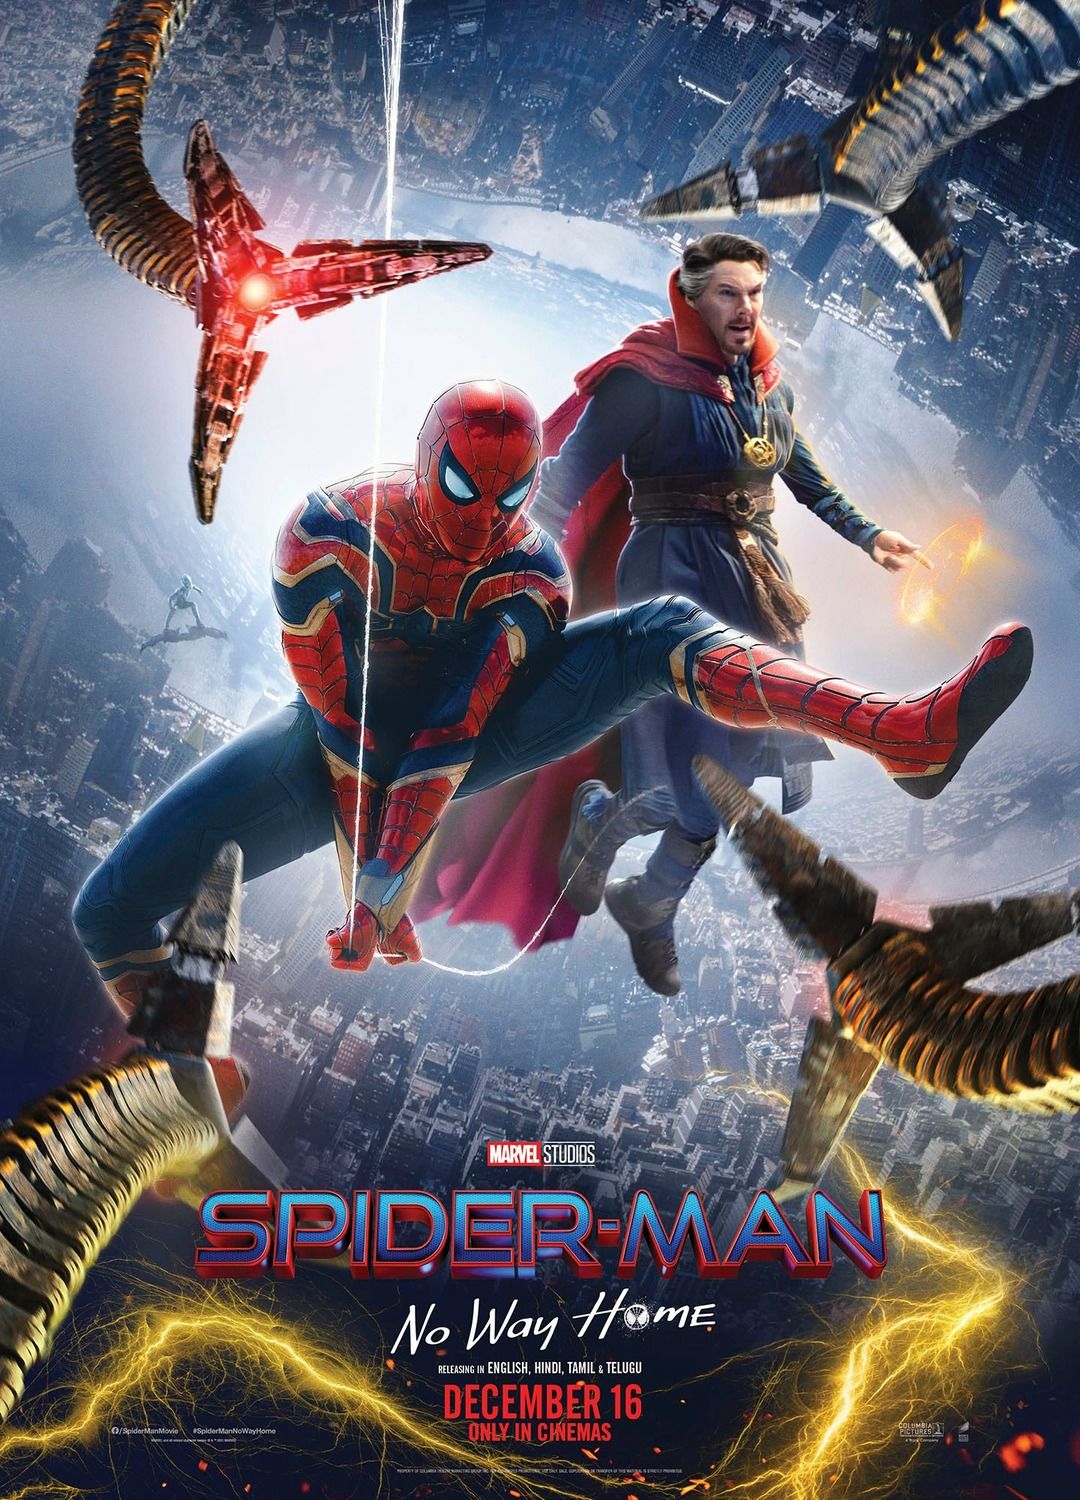 New SpiderMan No Way Home Footage Arrives as Tickets Go On Sale